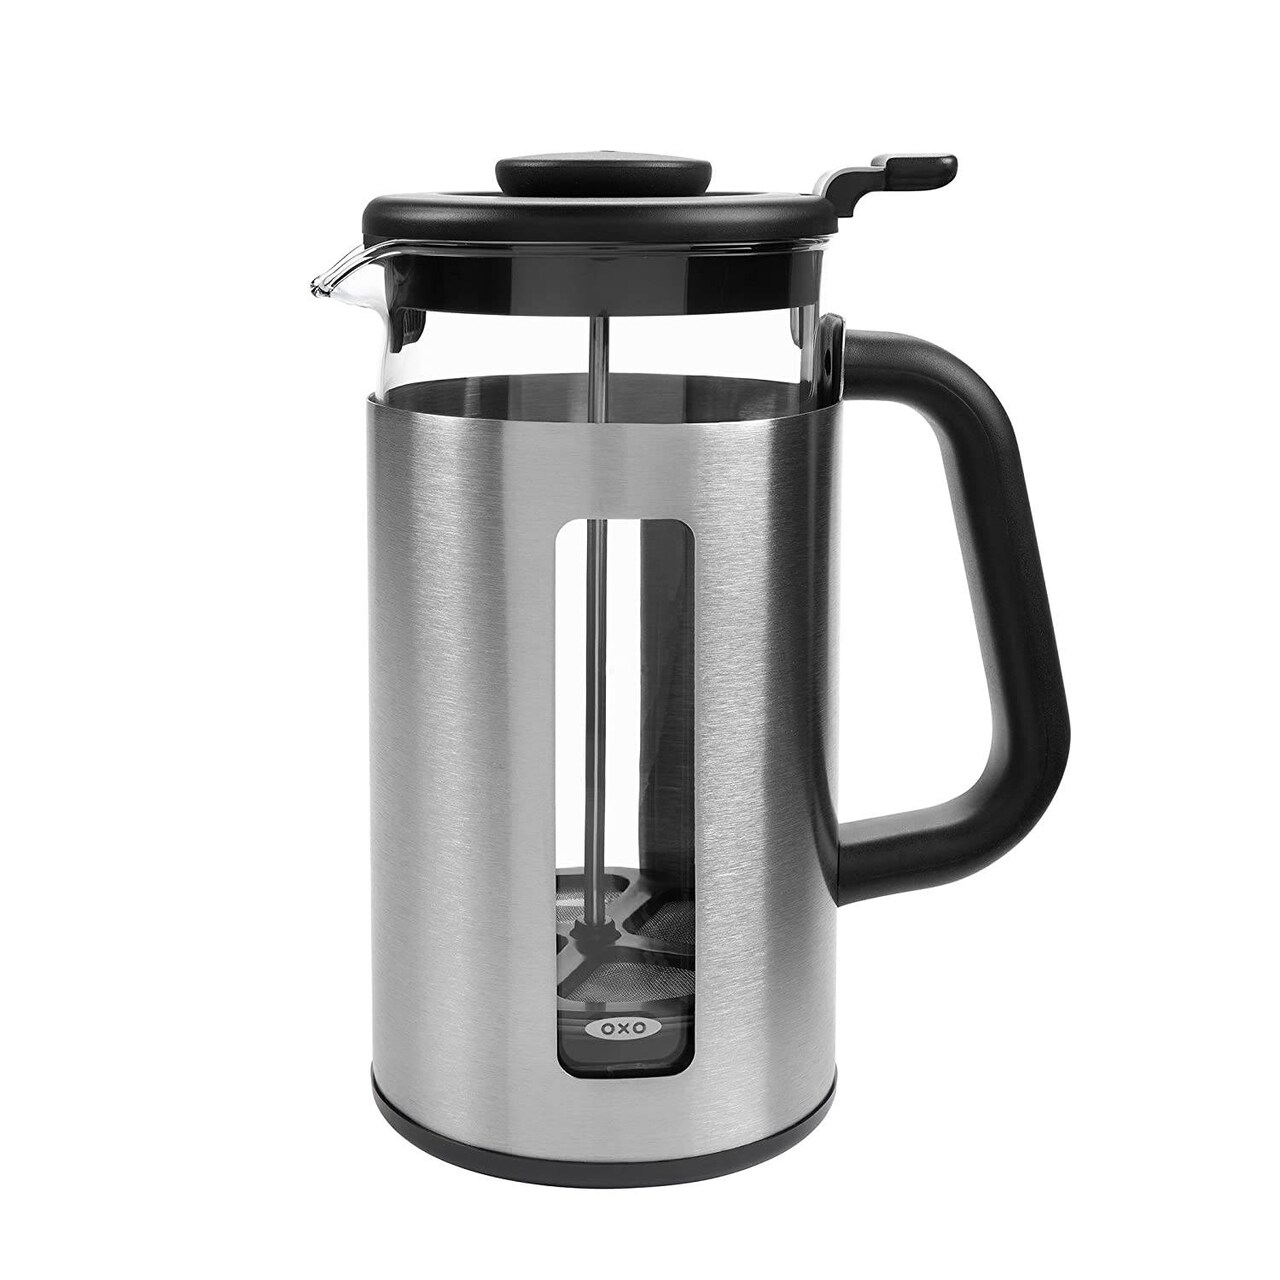 OXO French Press Coffee Maker Brew and Serve Glass Carafe 8 Cup